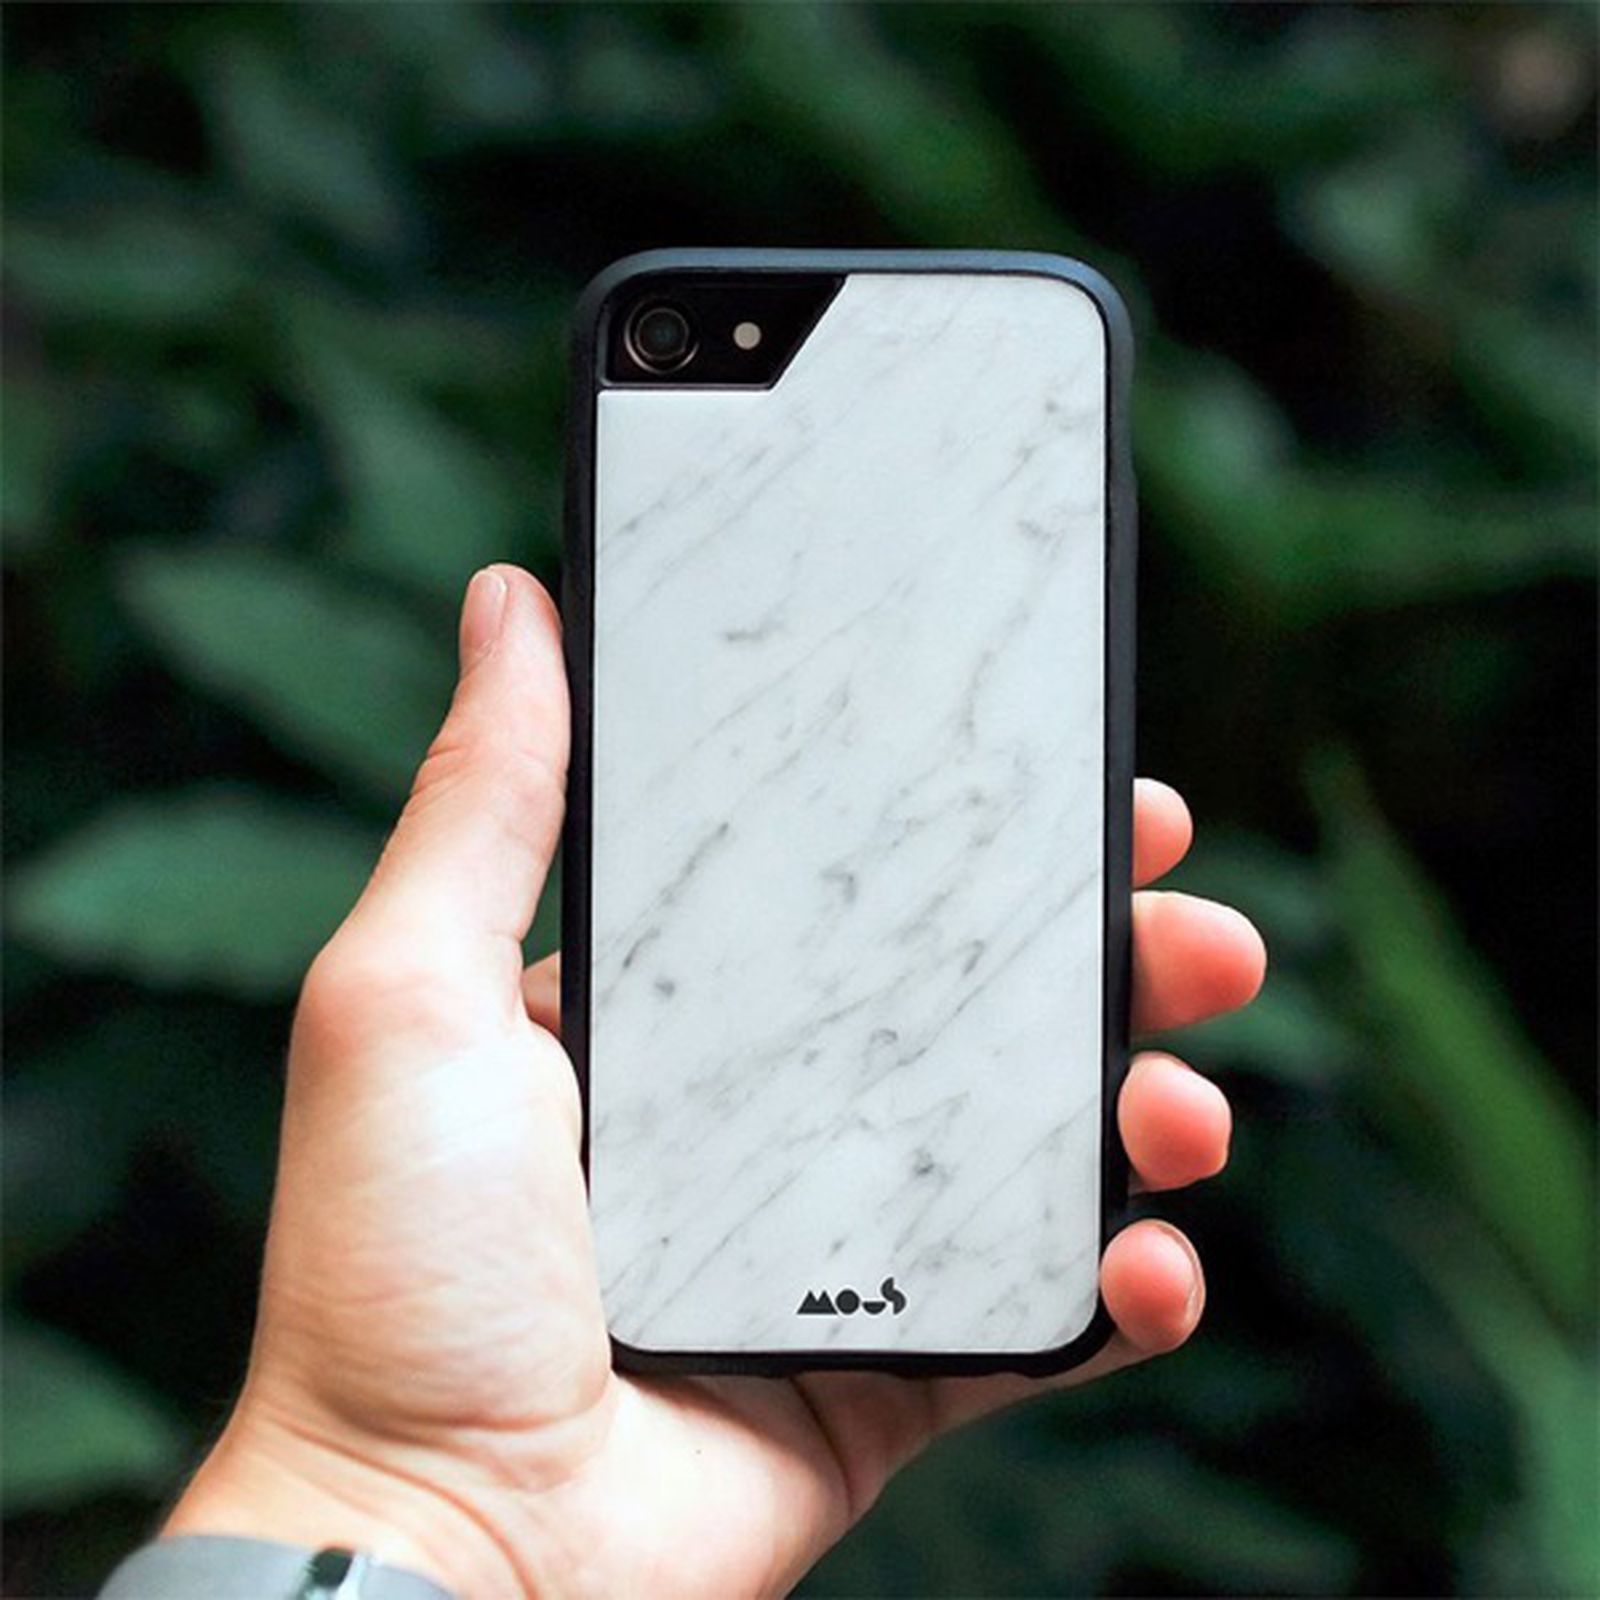 MacRumors Giveaway: Win a Super Protective iPhone Case From MacRumors